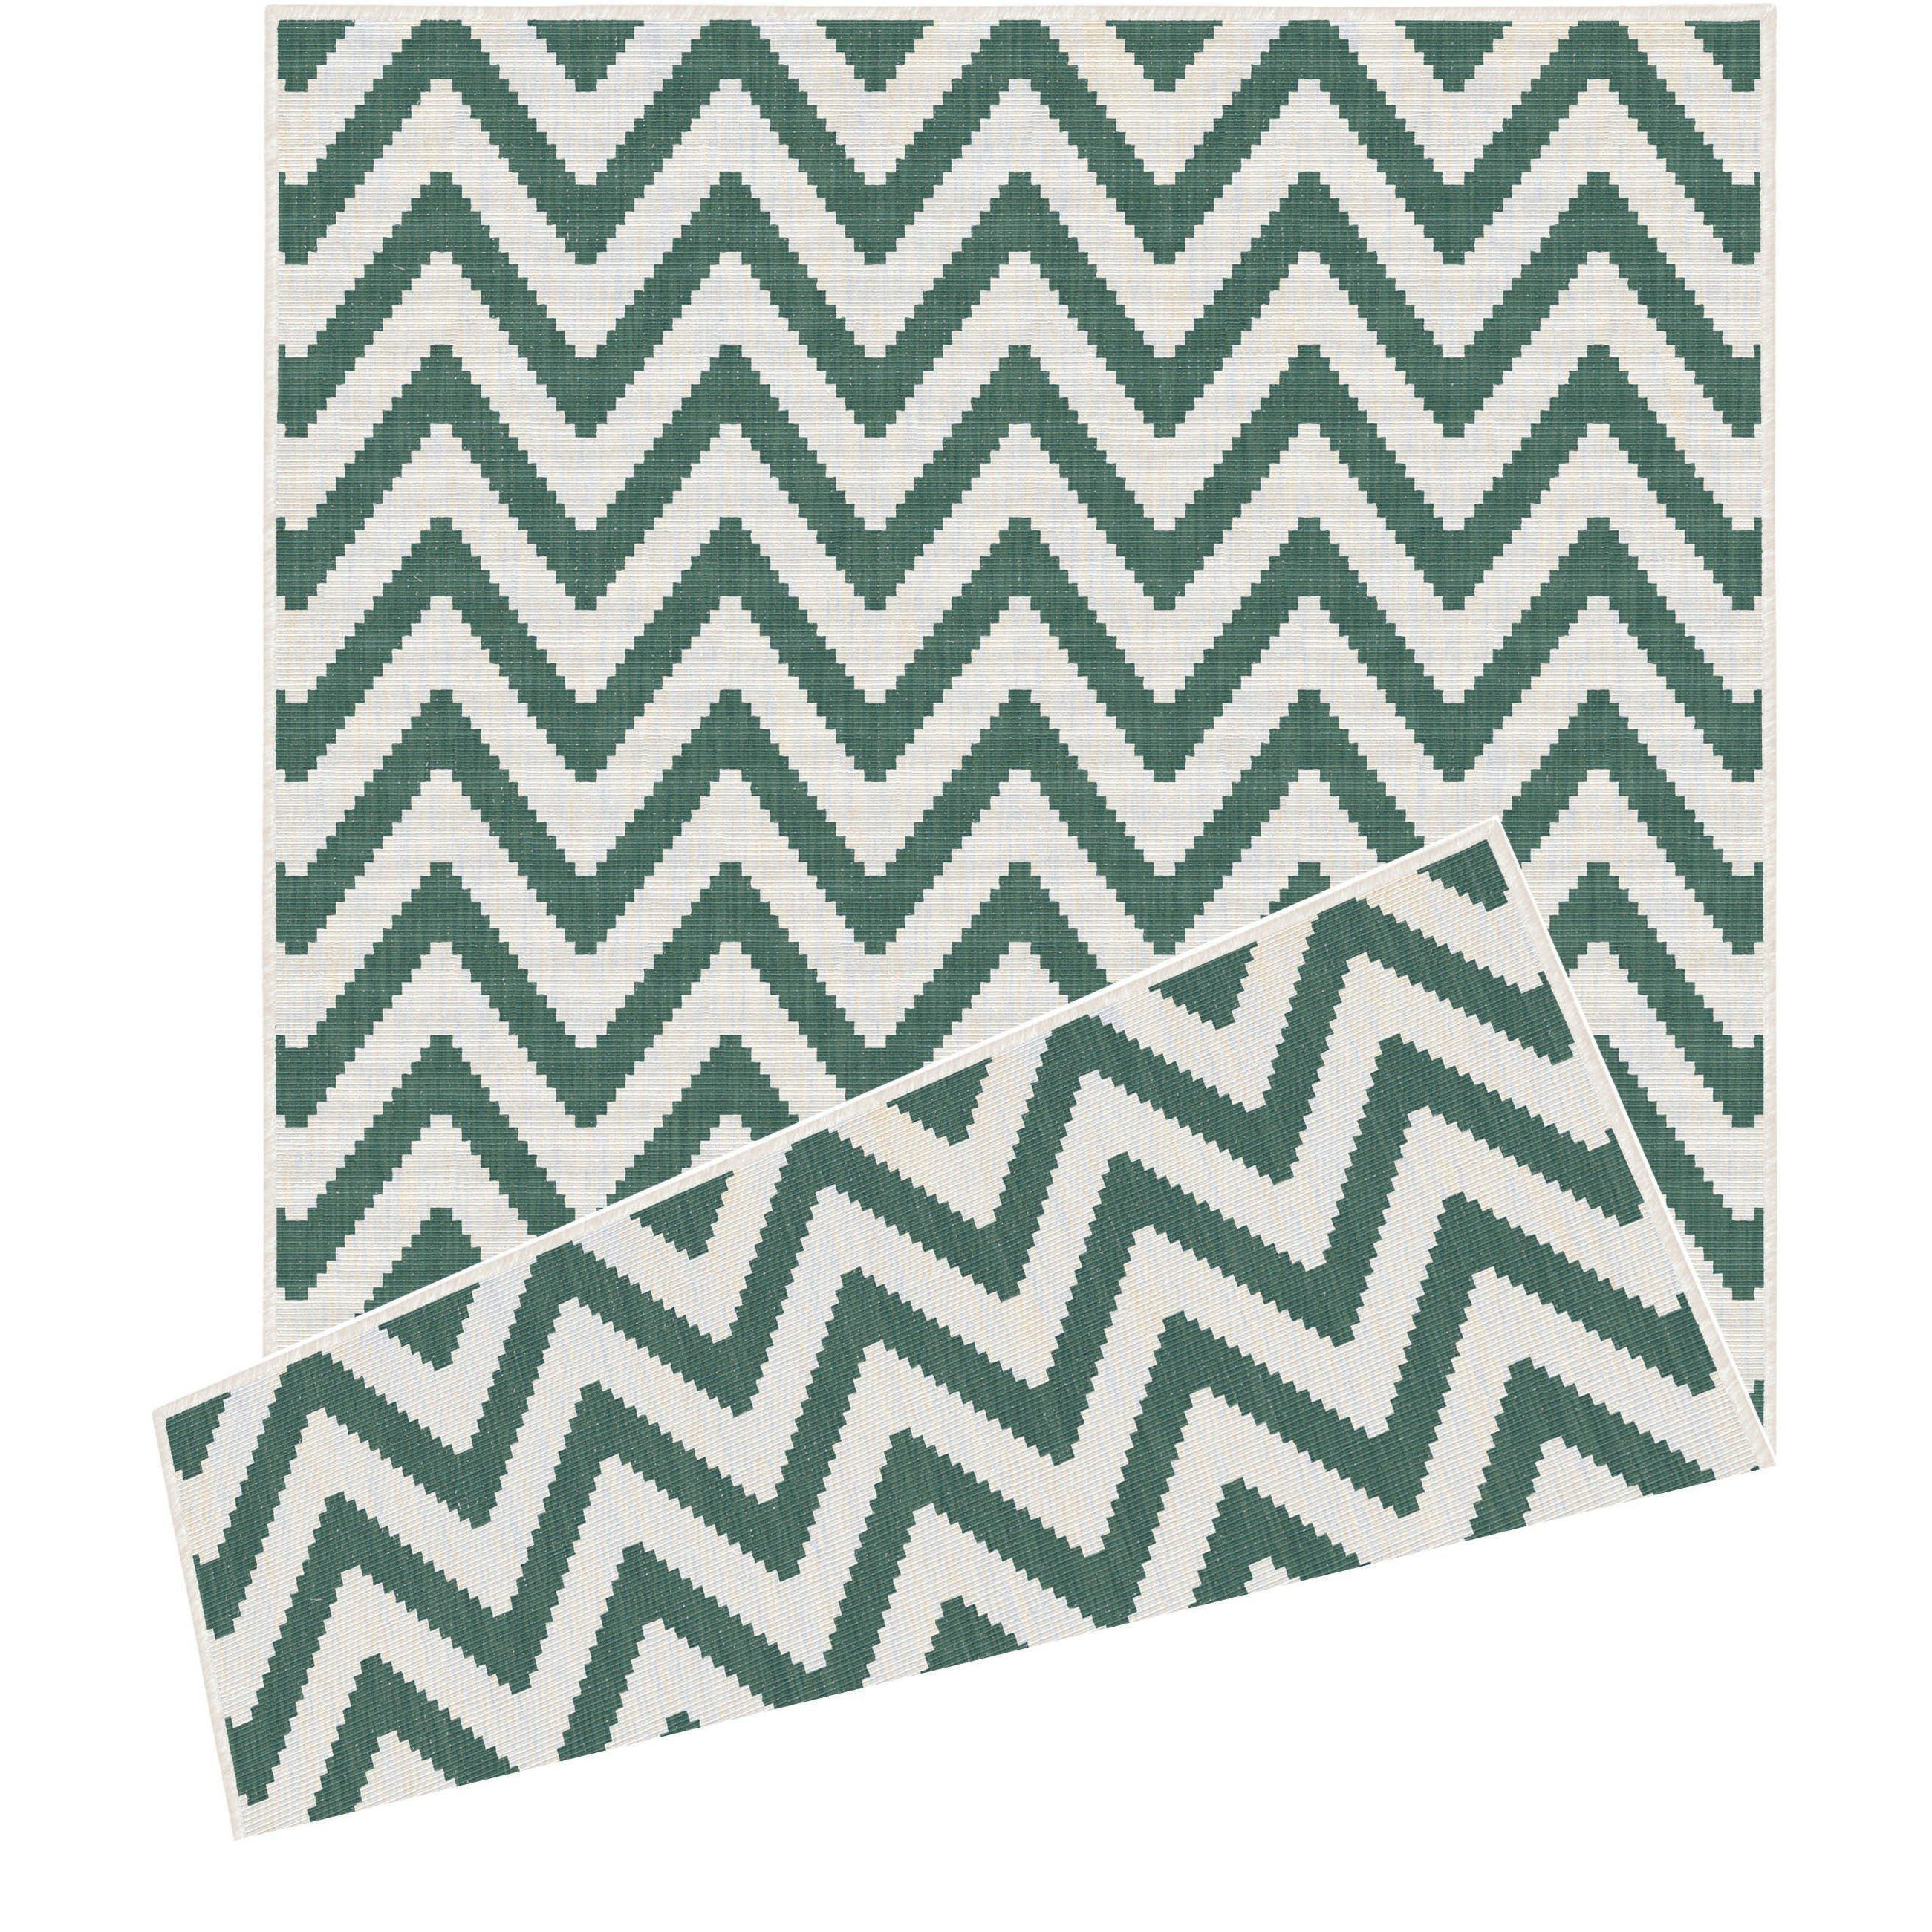 Duo Weave Collection Outdoor Rugs in Zigzag Design - image 1